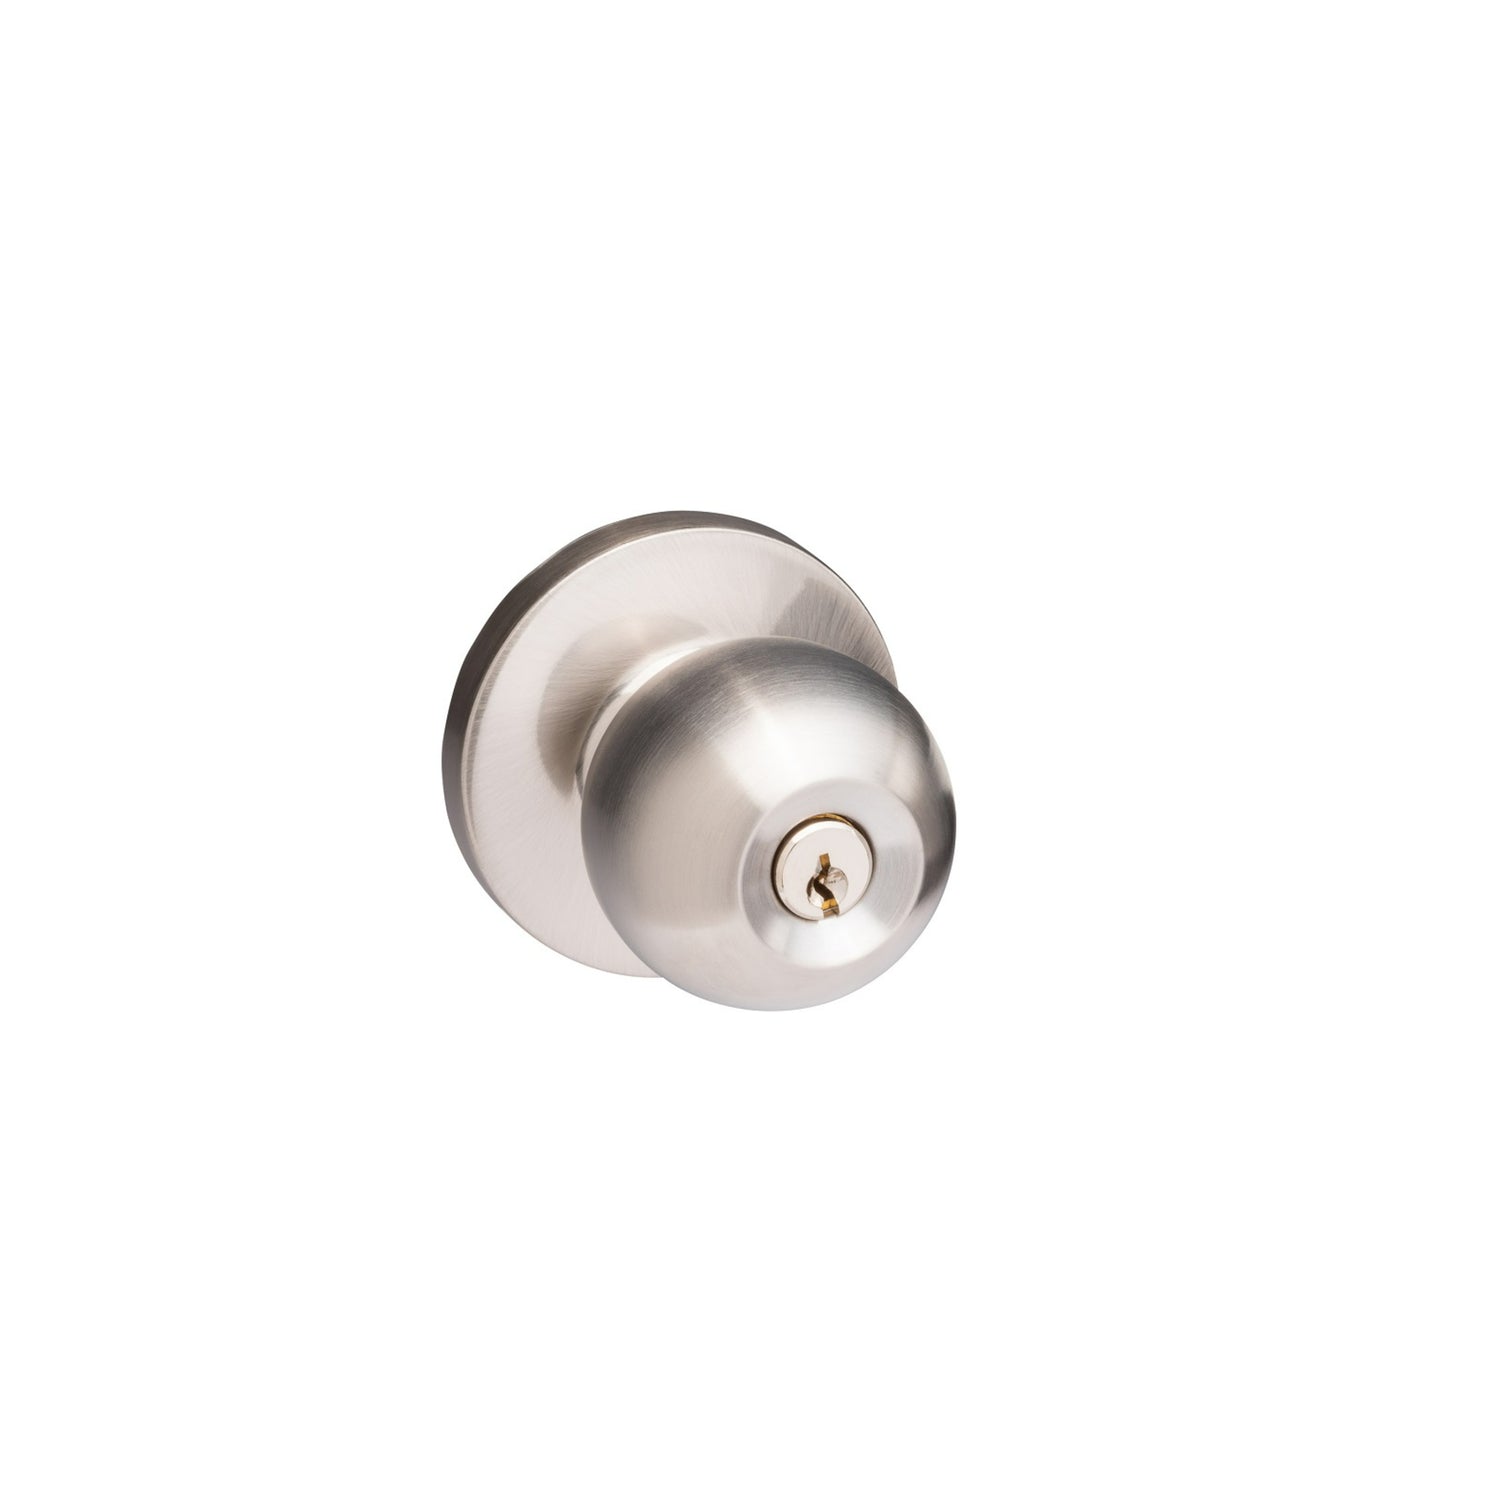 Stainless Steel Commercial Storeroom Ball Knob Trim with Lock for Panic Exit Device